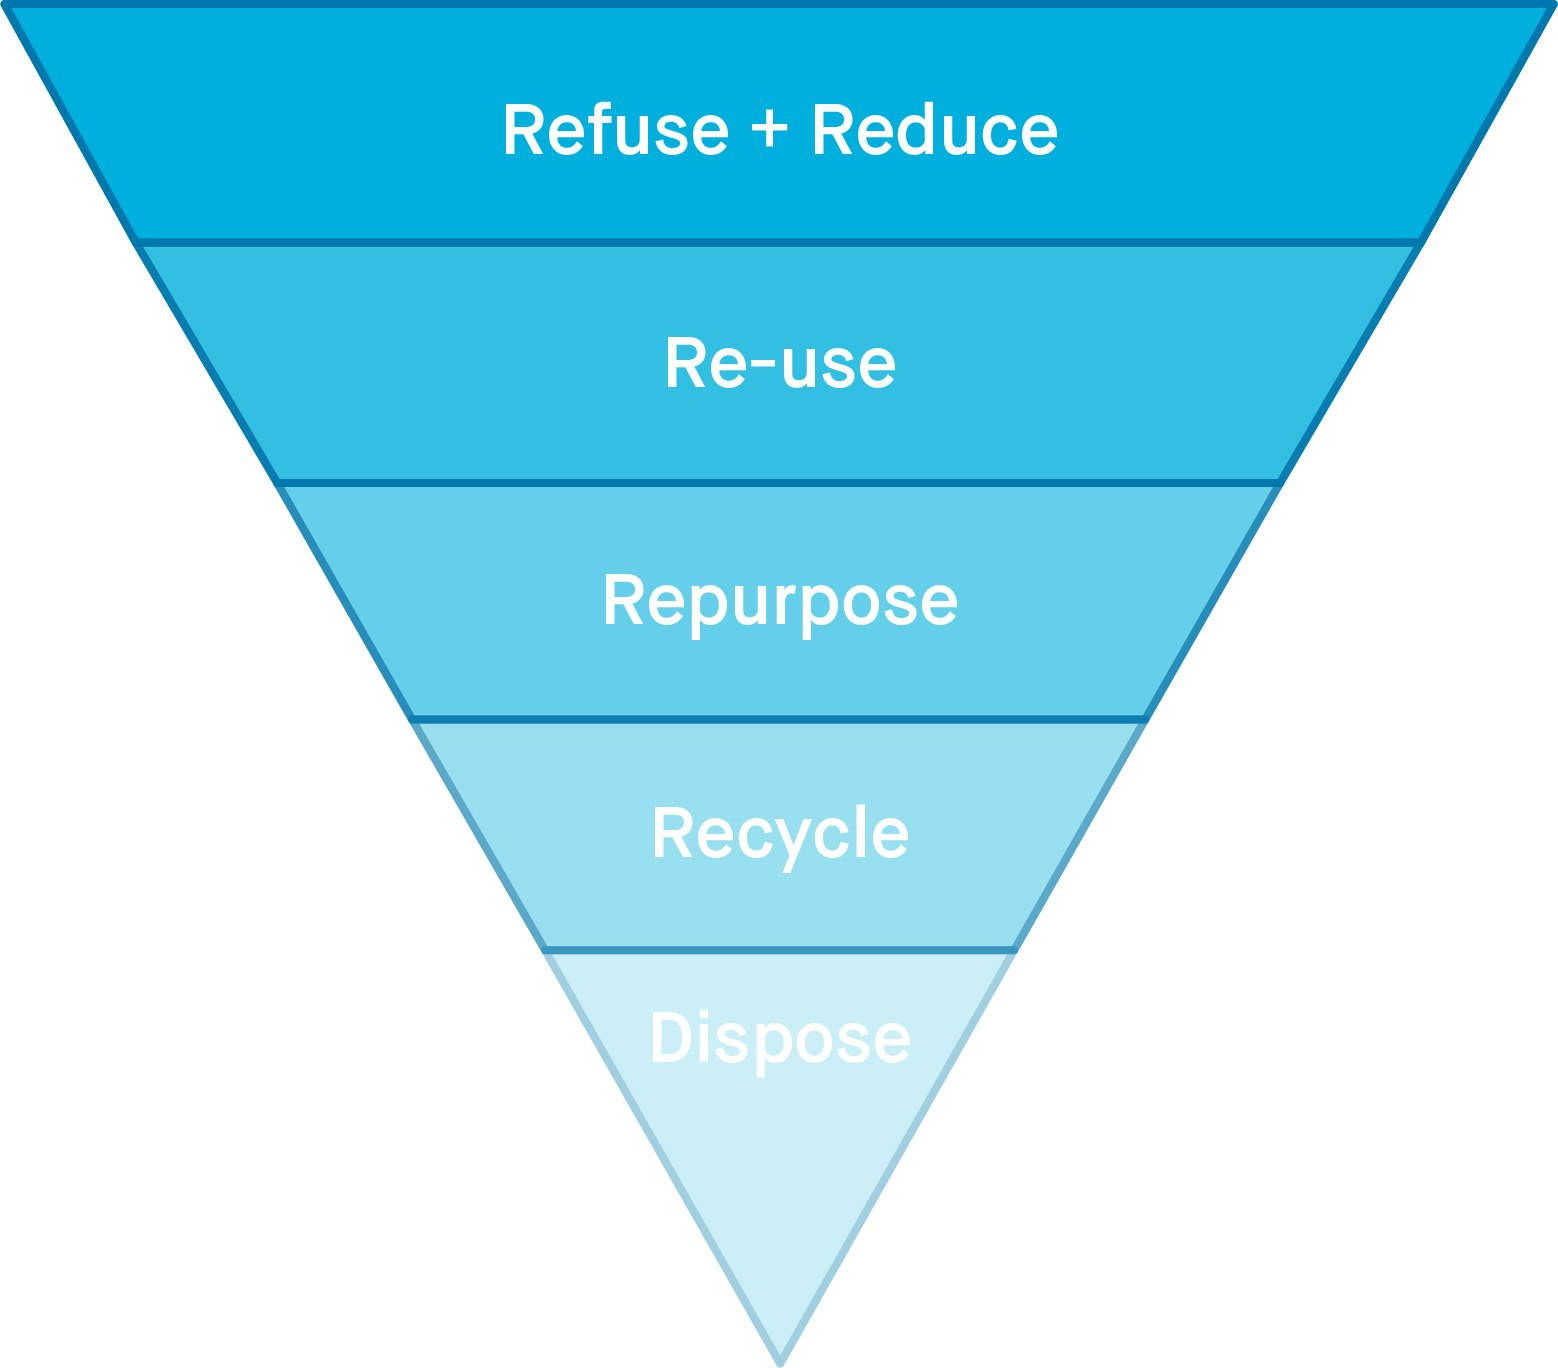 https://methodrecycling.imgix.net/journal/recycling-101-the-ultimate-guide-to-the-waste-hierarchy/Waste-Hierarchy-Illustration.jpg?auto=compress%2Cformat&fit=clip&q=80&w=800%20800w